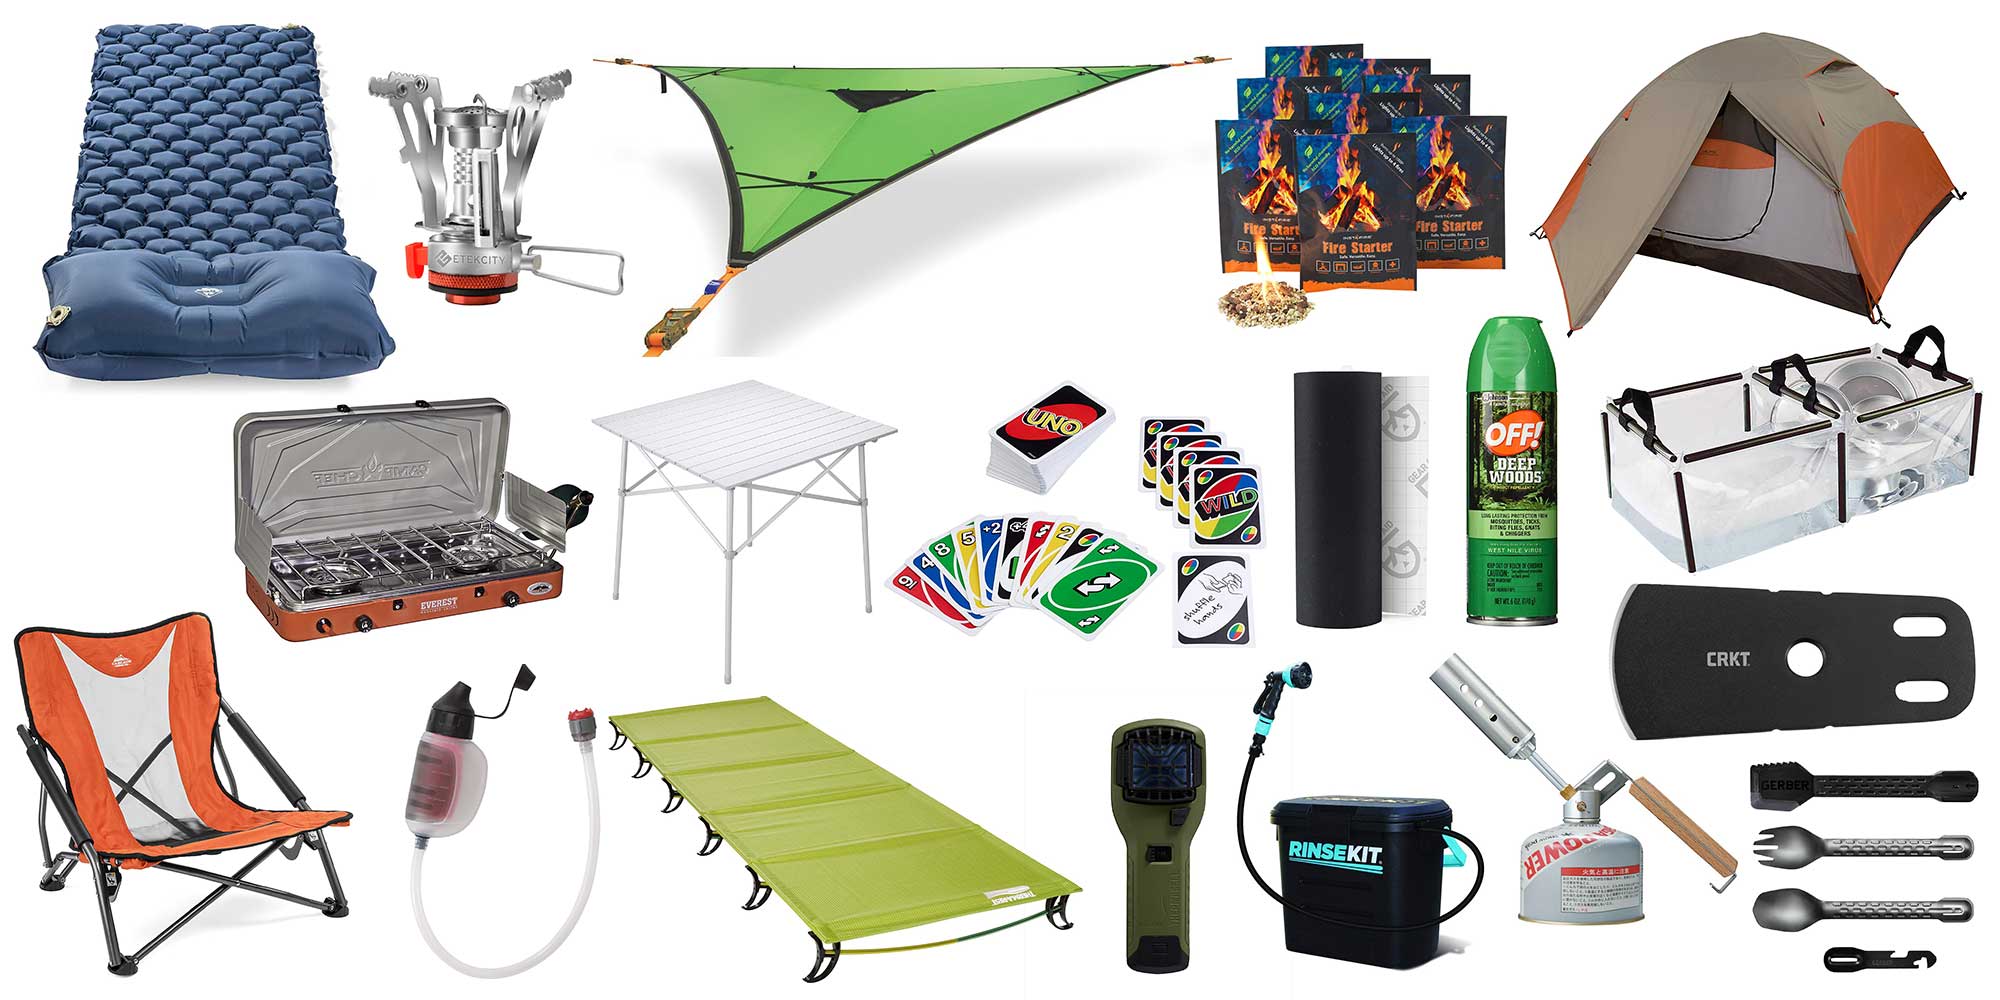 20 Best Camping Gadgets and Accessories of 2022